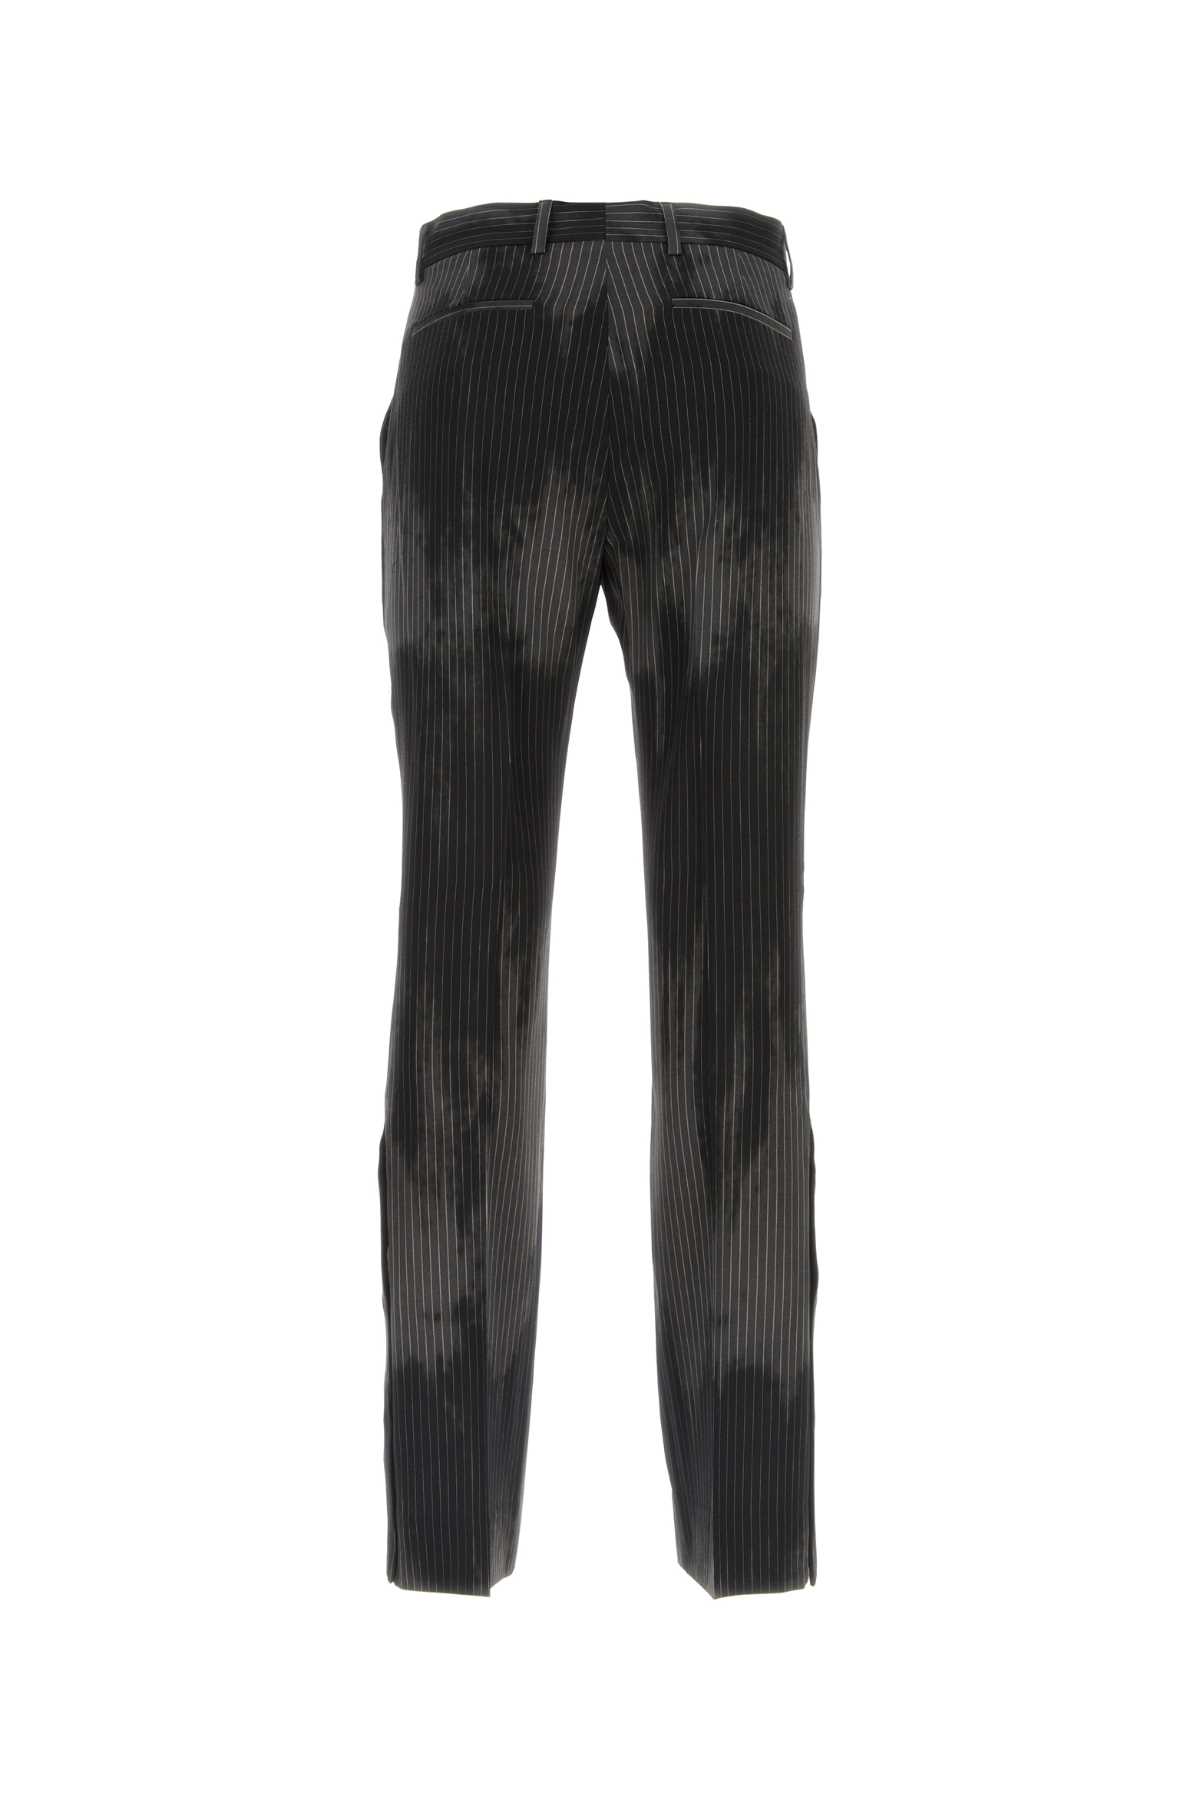 Amiri Embroidered Wool Blend Trouser In Black